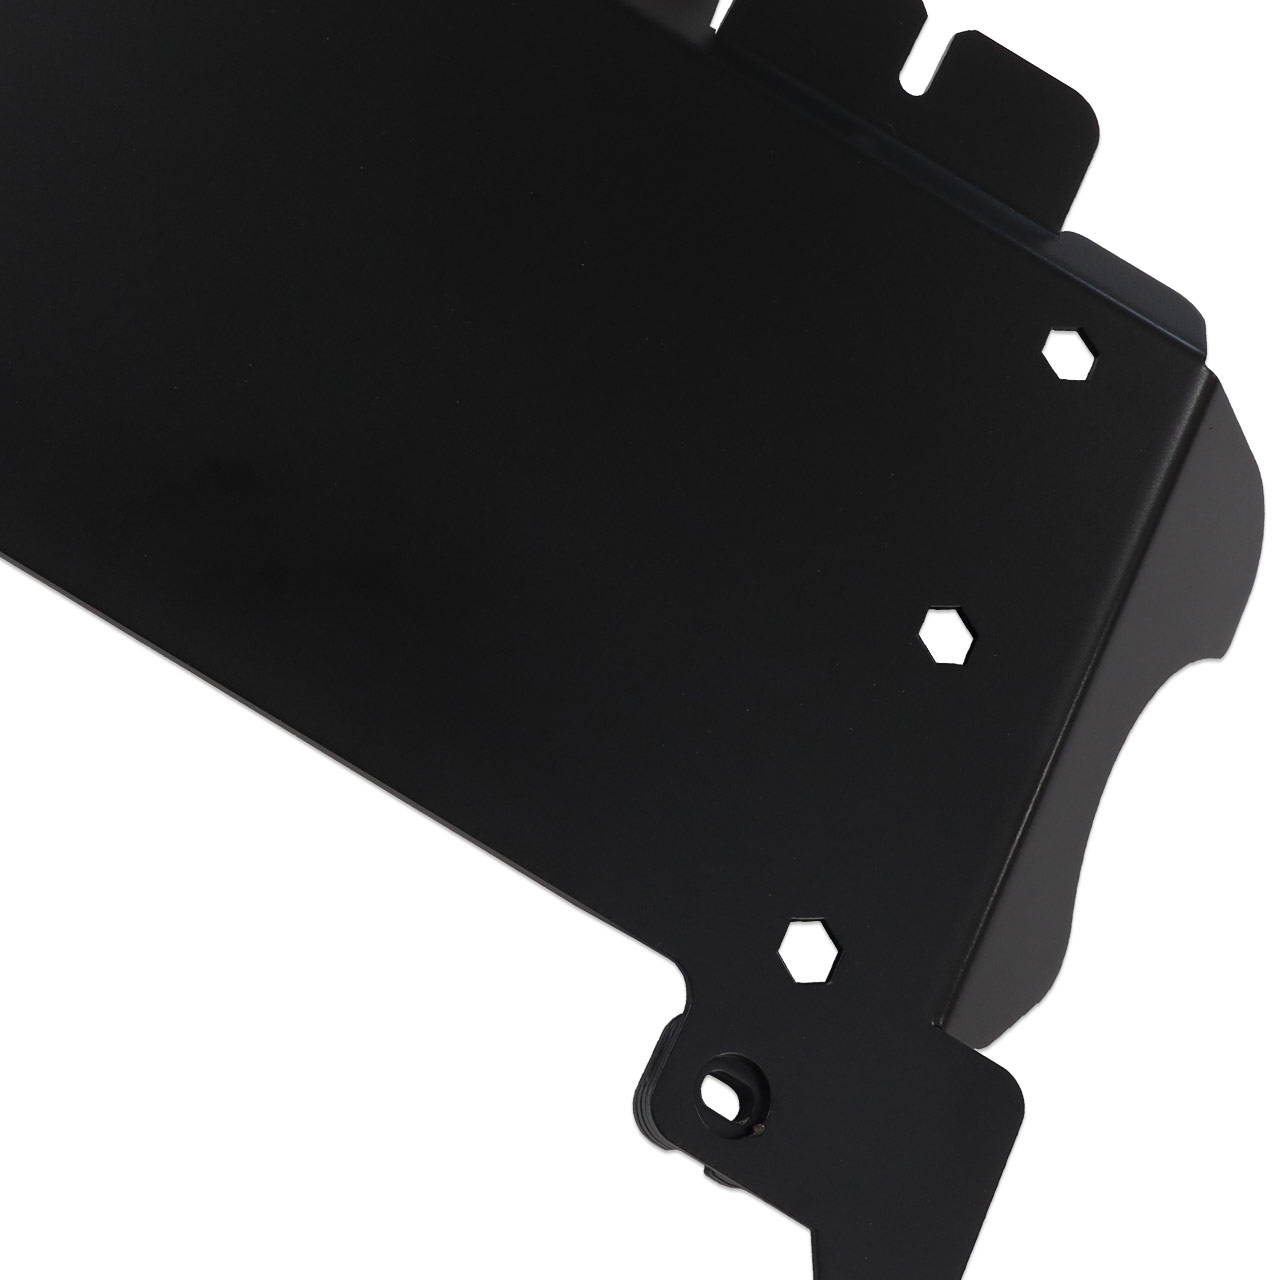 IAG Rock Armor Engine Skid Plate for 2021+ Ford Bronco- Powder Coating